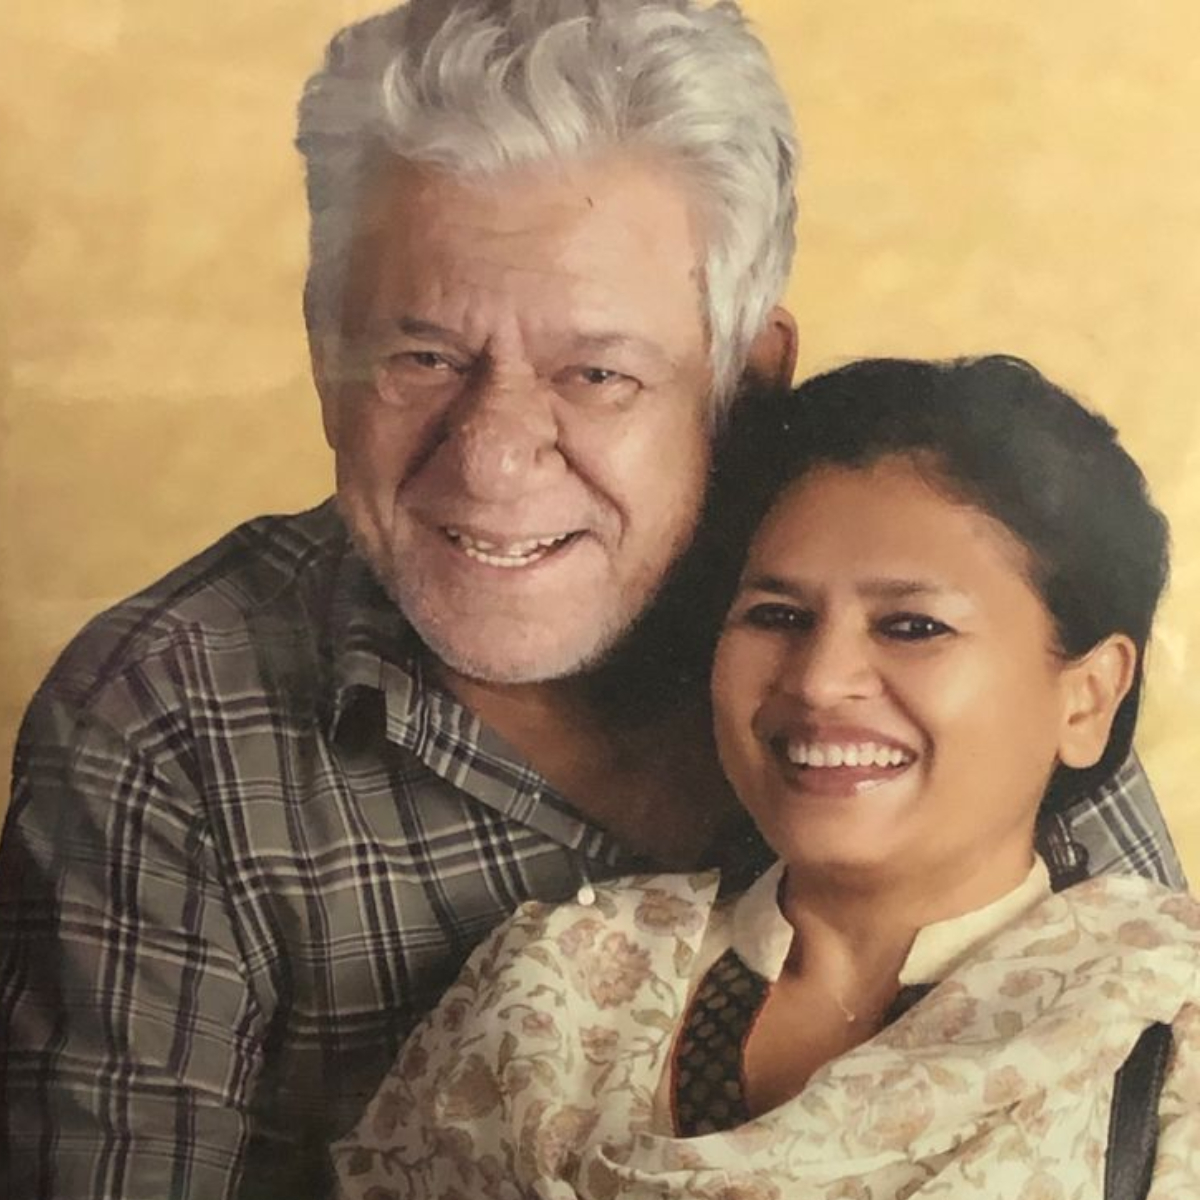 EXCLUSIVE: Om Puri leaving me when I was pregnant always remained with me, says Seema Kapoor